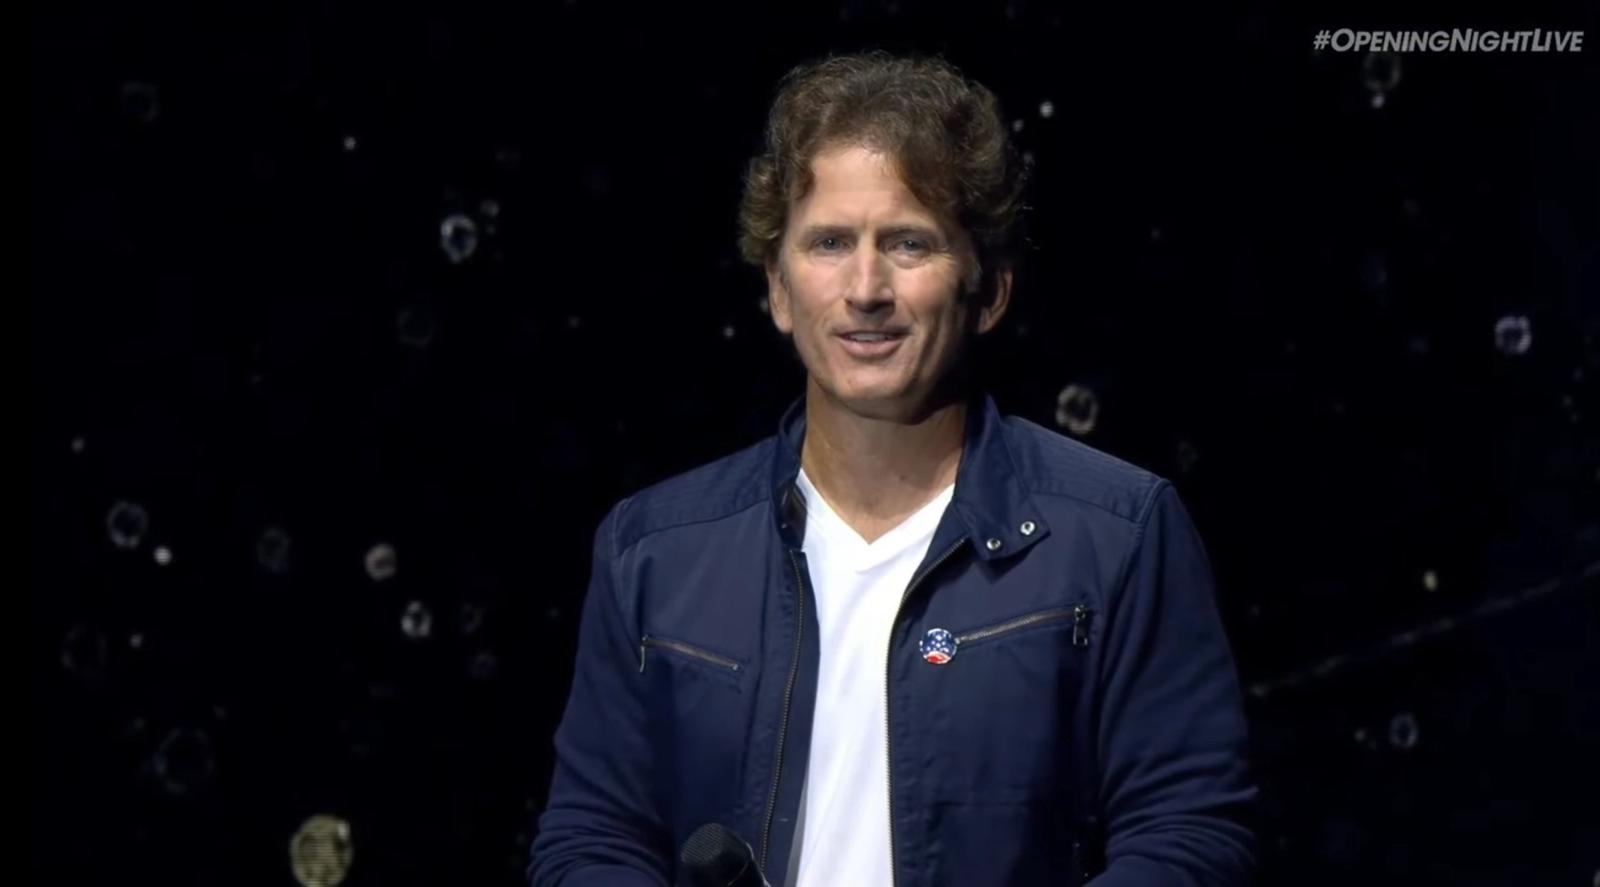 Todd Howard on stage at gamescom